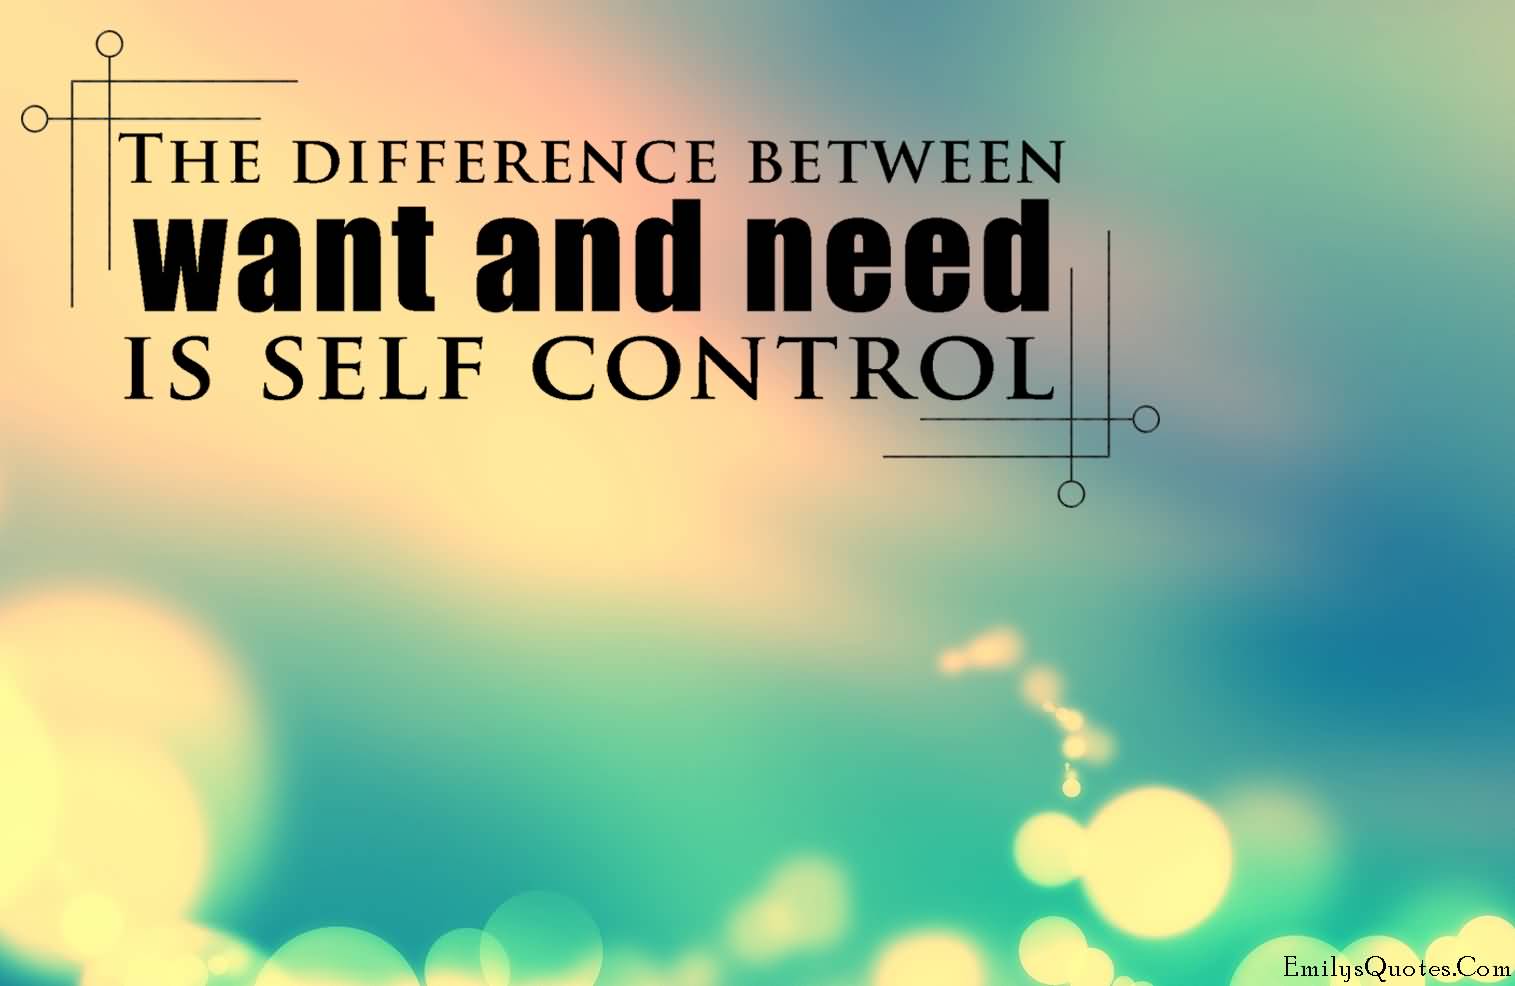 The difference between want and need is self control